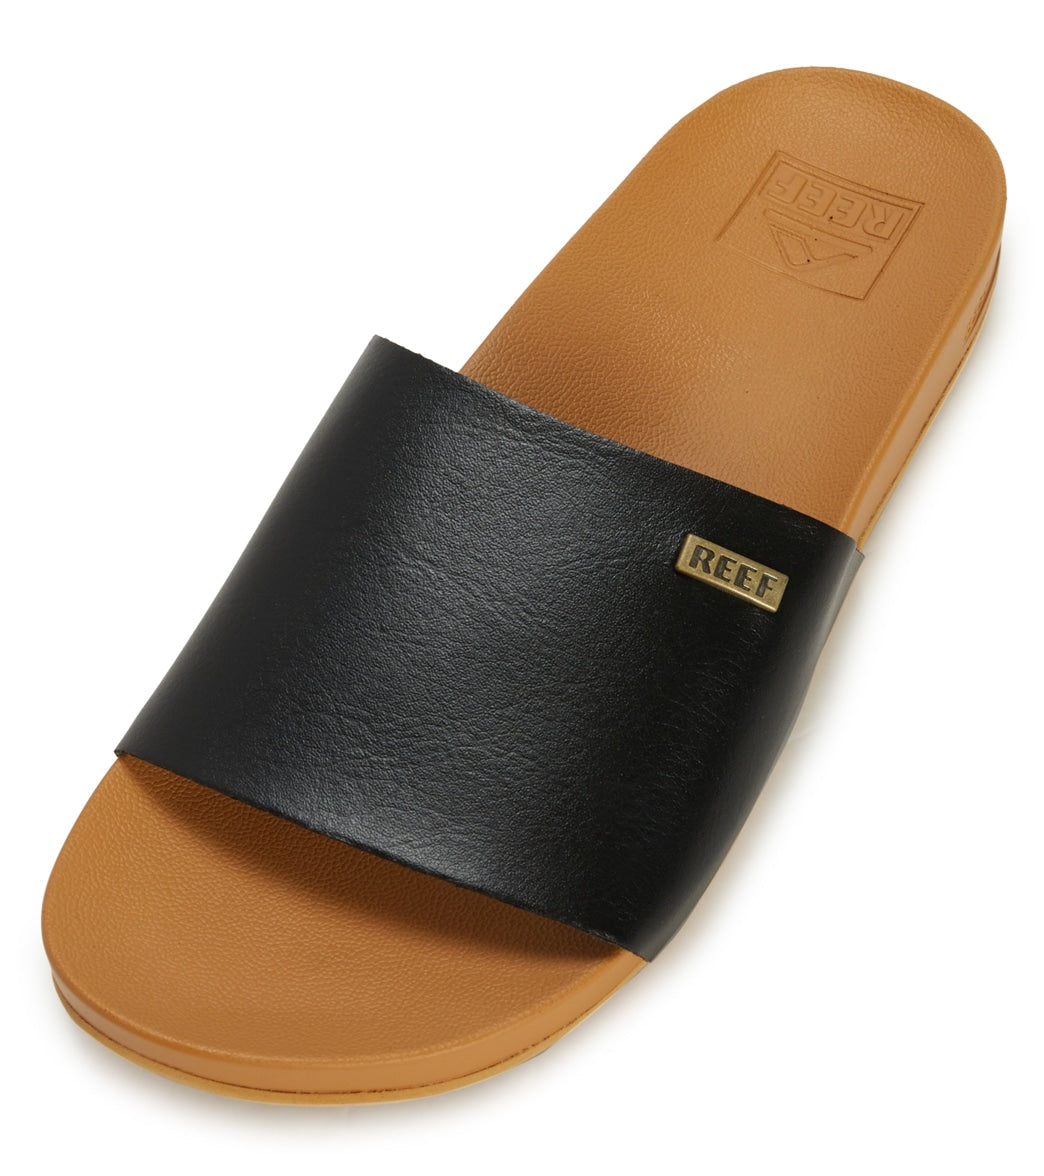 Reef Women's Cushion Scout Slide Sandals at